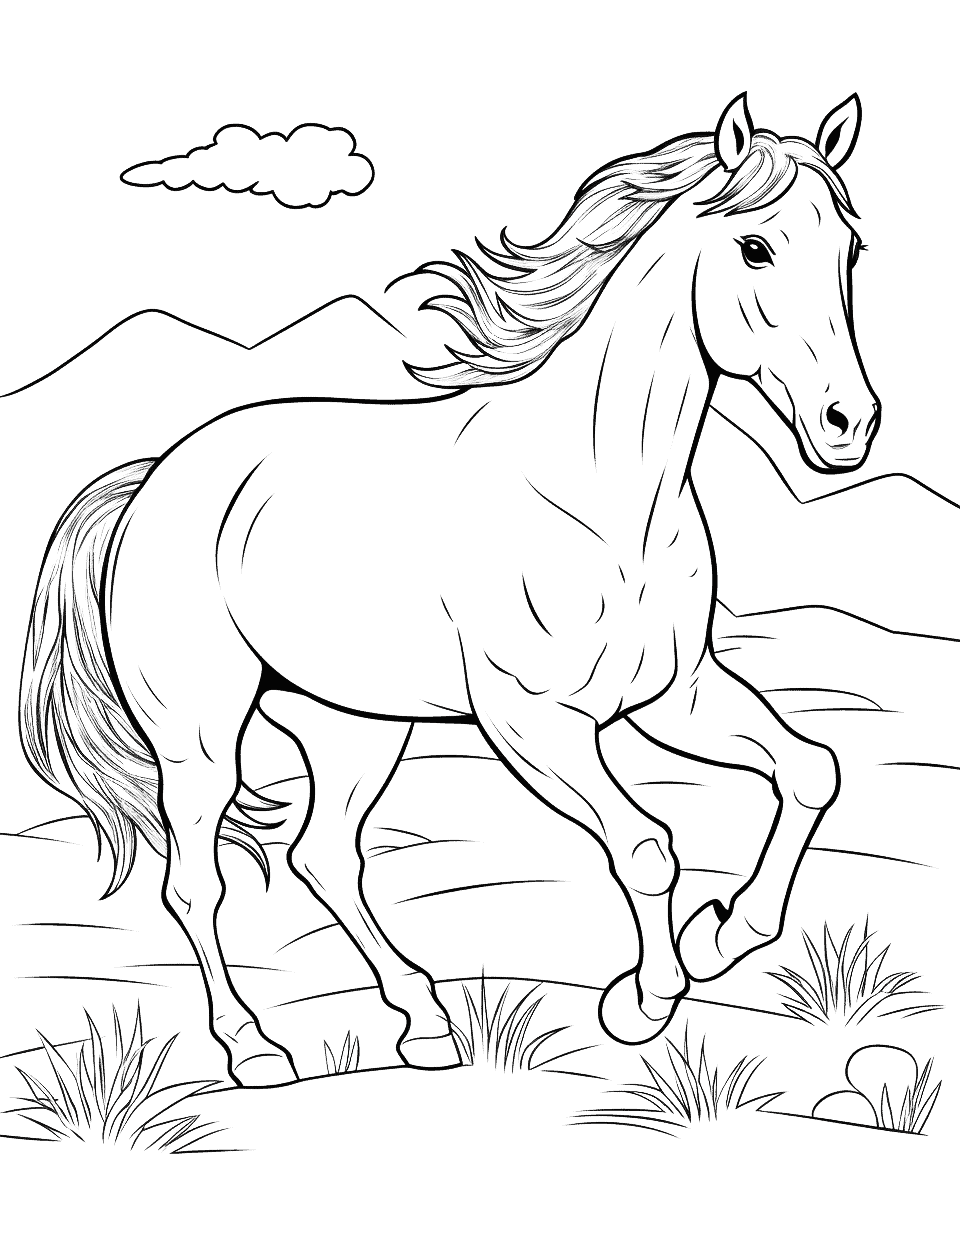 Full Page Detailed Horse Coloring - A full-page, detailed drawing of a horse, perfect for kids who love to color.